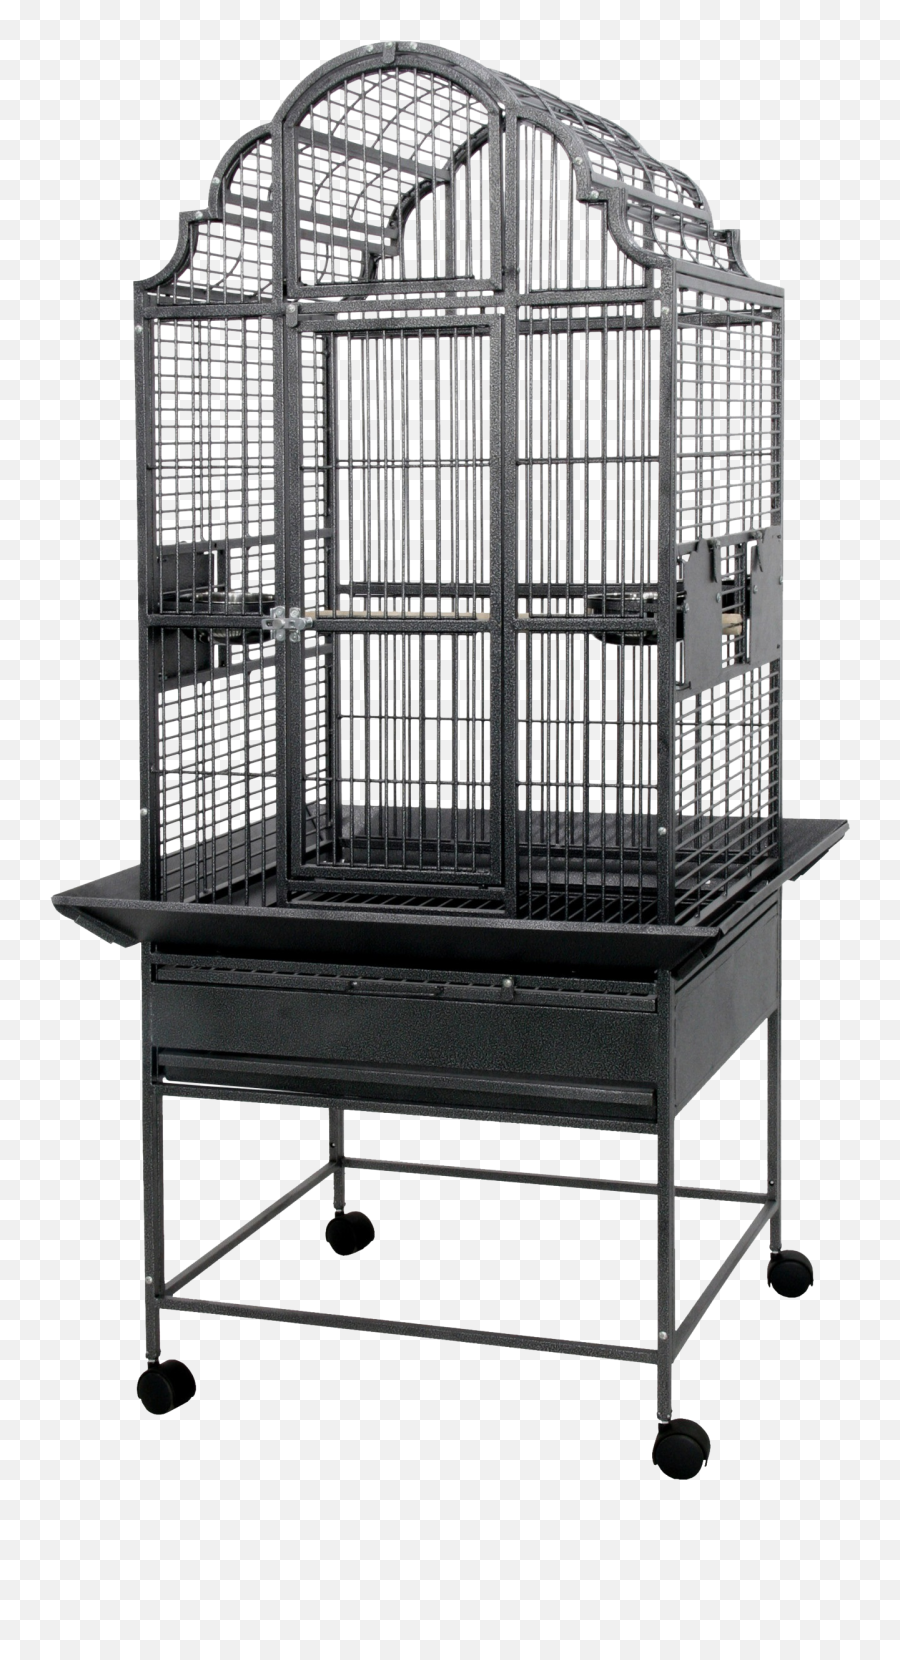 Gc6 - 2422 Black 24x22x62 Opening Victorian Top Cage Cage Company Dome Top Bird Cage Small Emoji,Cage Png